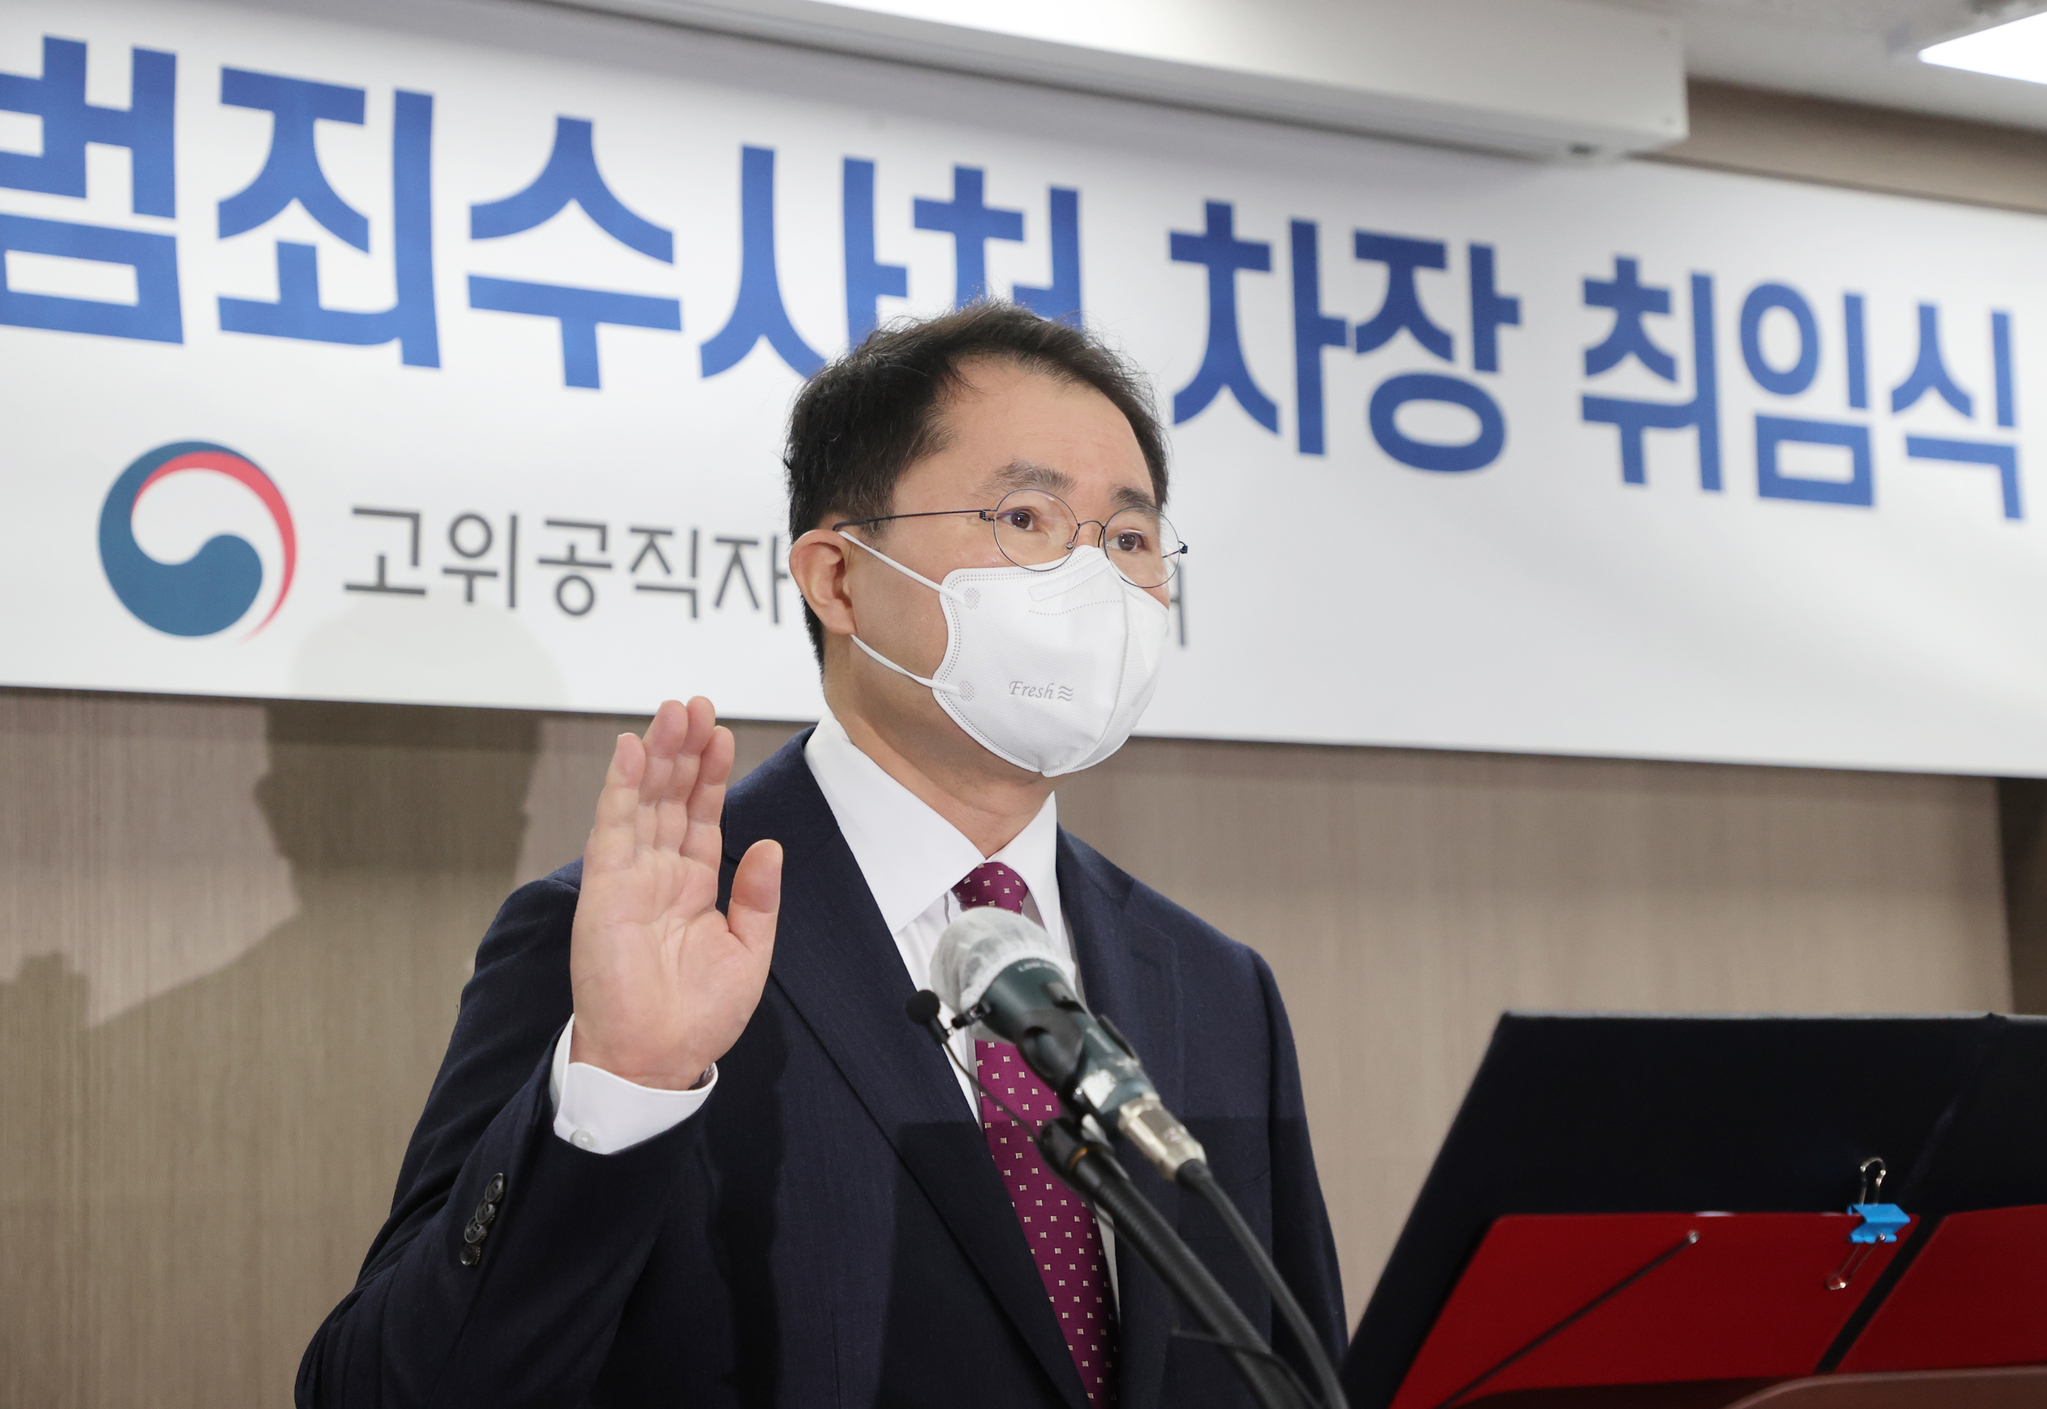 Inauguration of Deputy General Manager Yeo Un-guk…  “I will not be impatient”